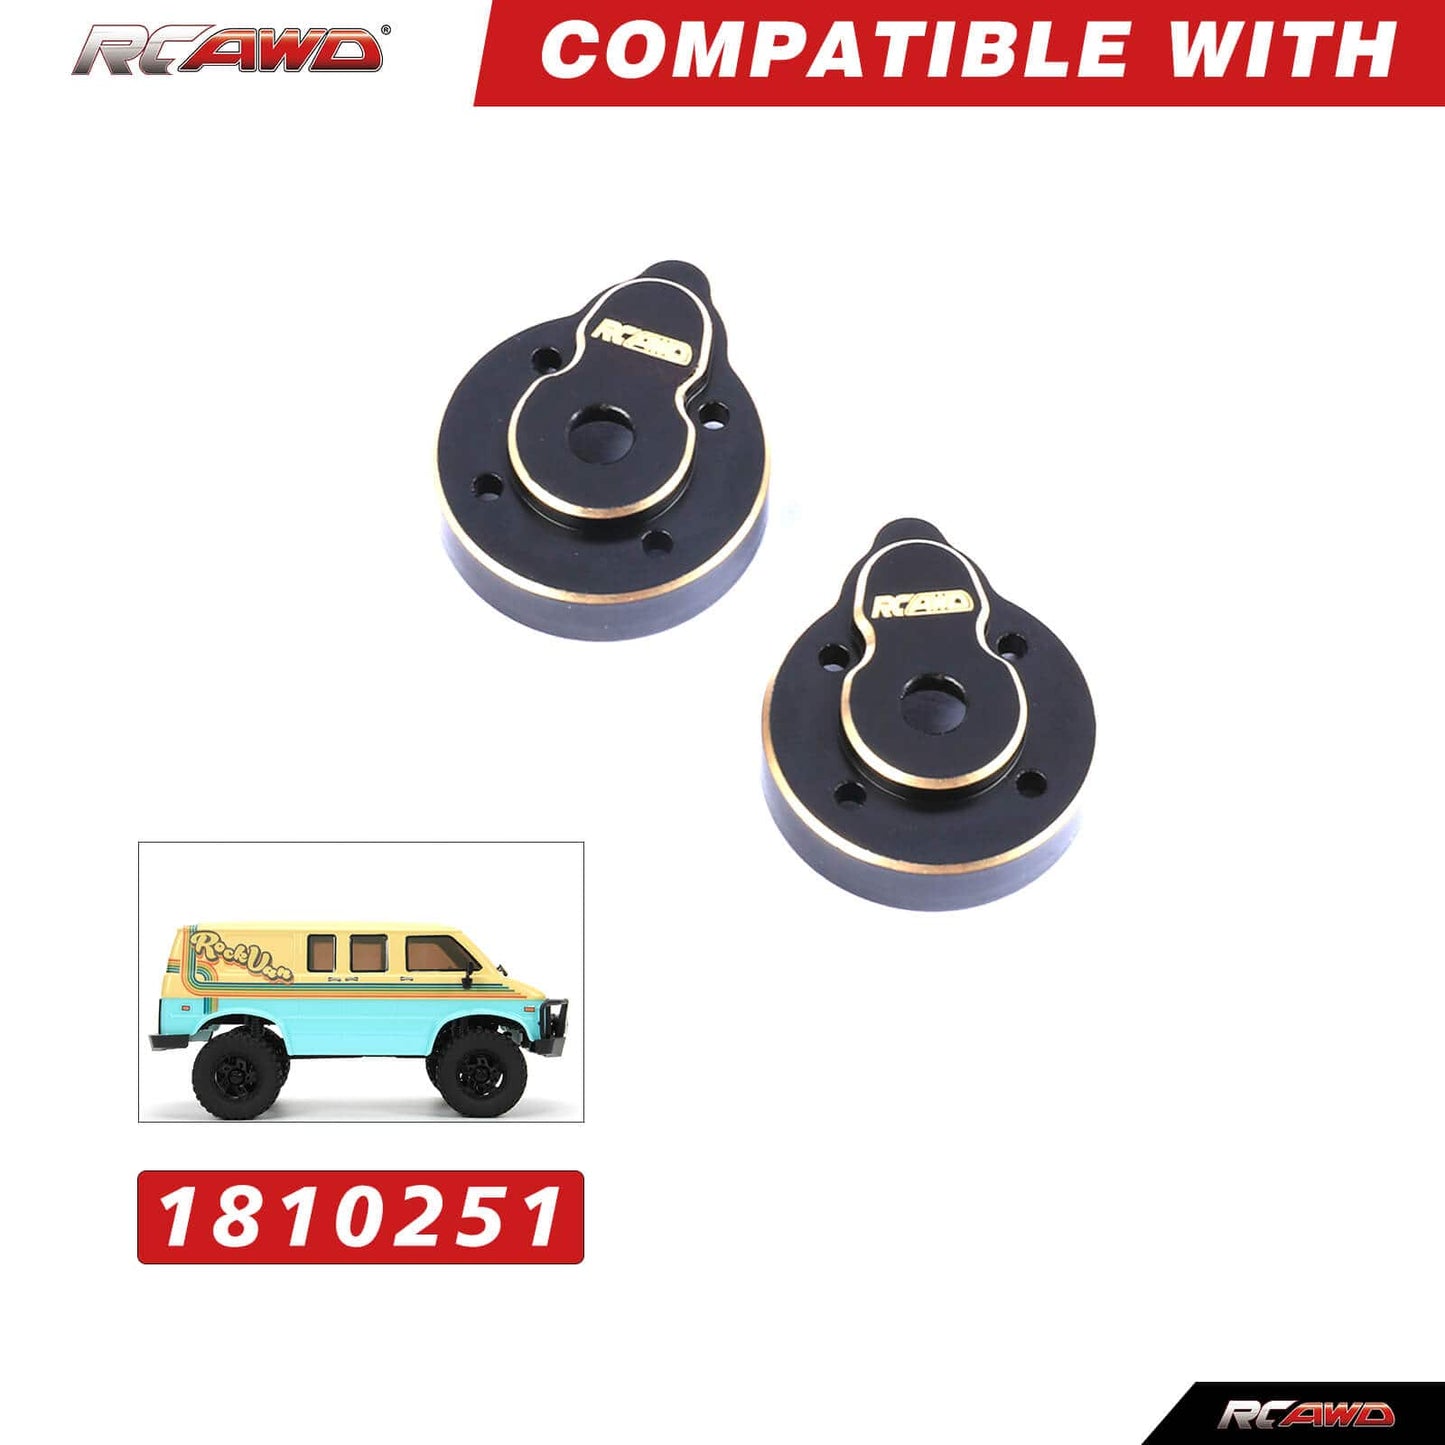 RCAWD HobbyPlus CR18 Upgrades Front &Rear Portal Axle Counterweight 240297BL+240296BL - RCAWD